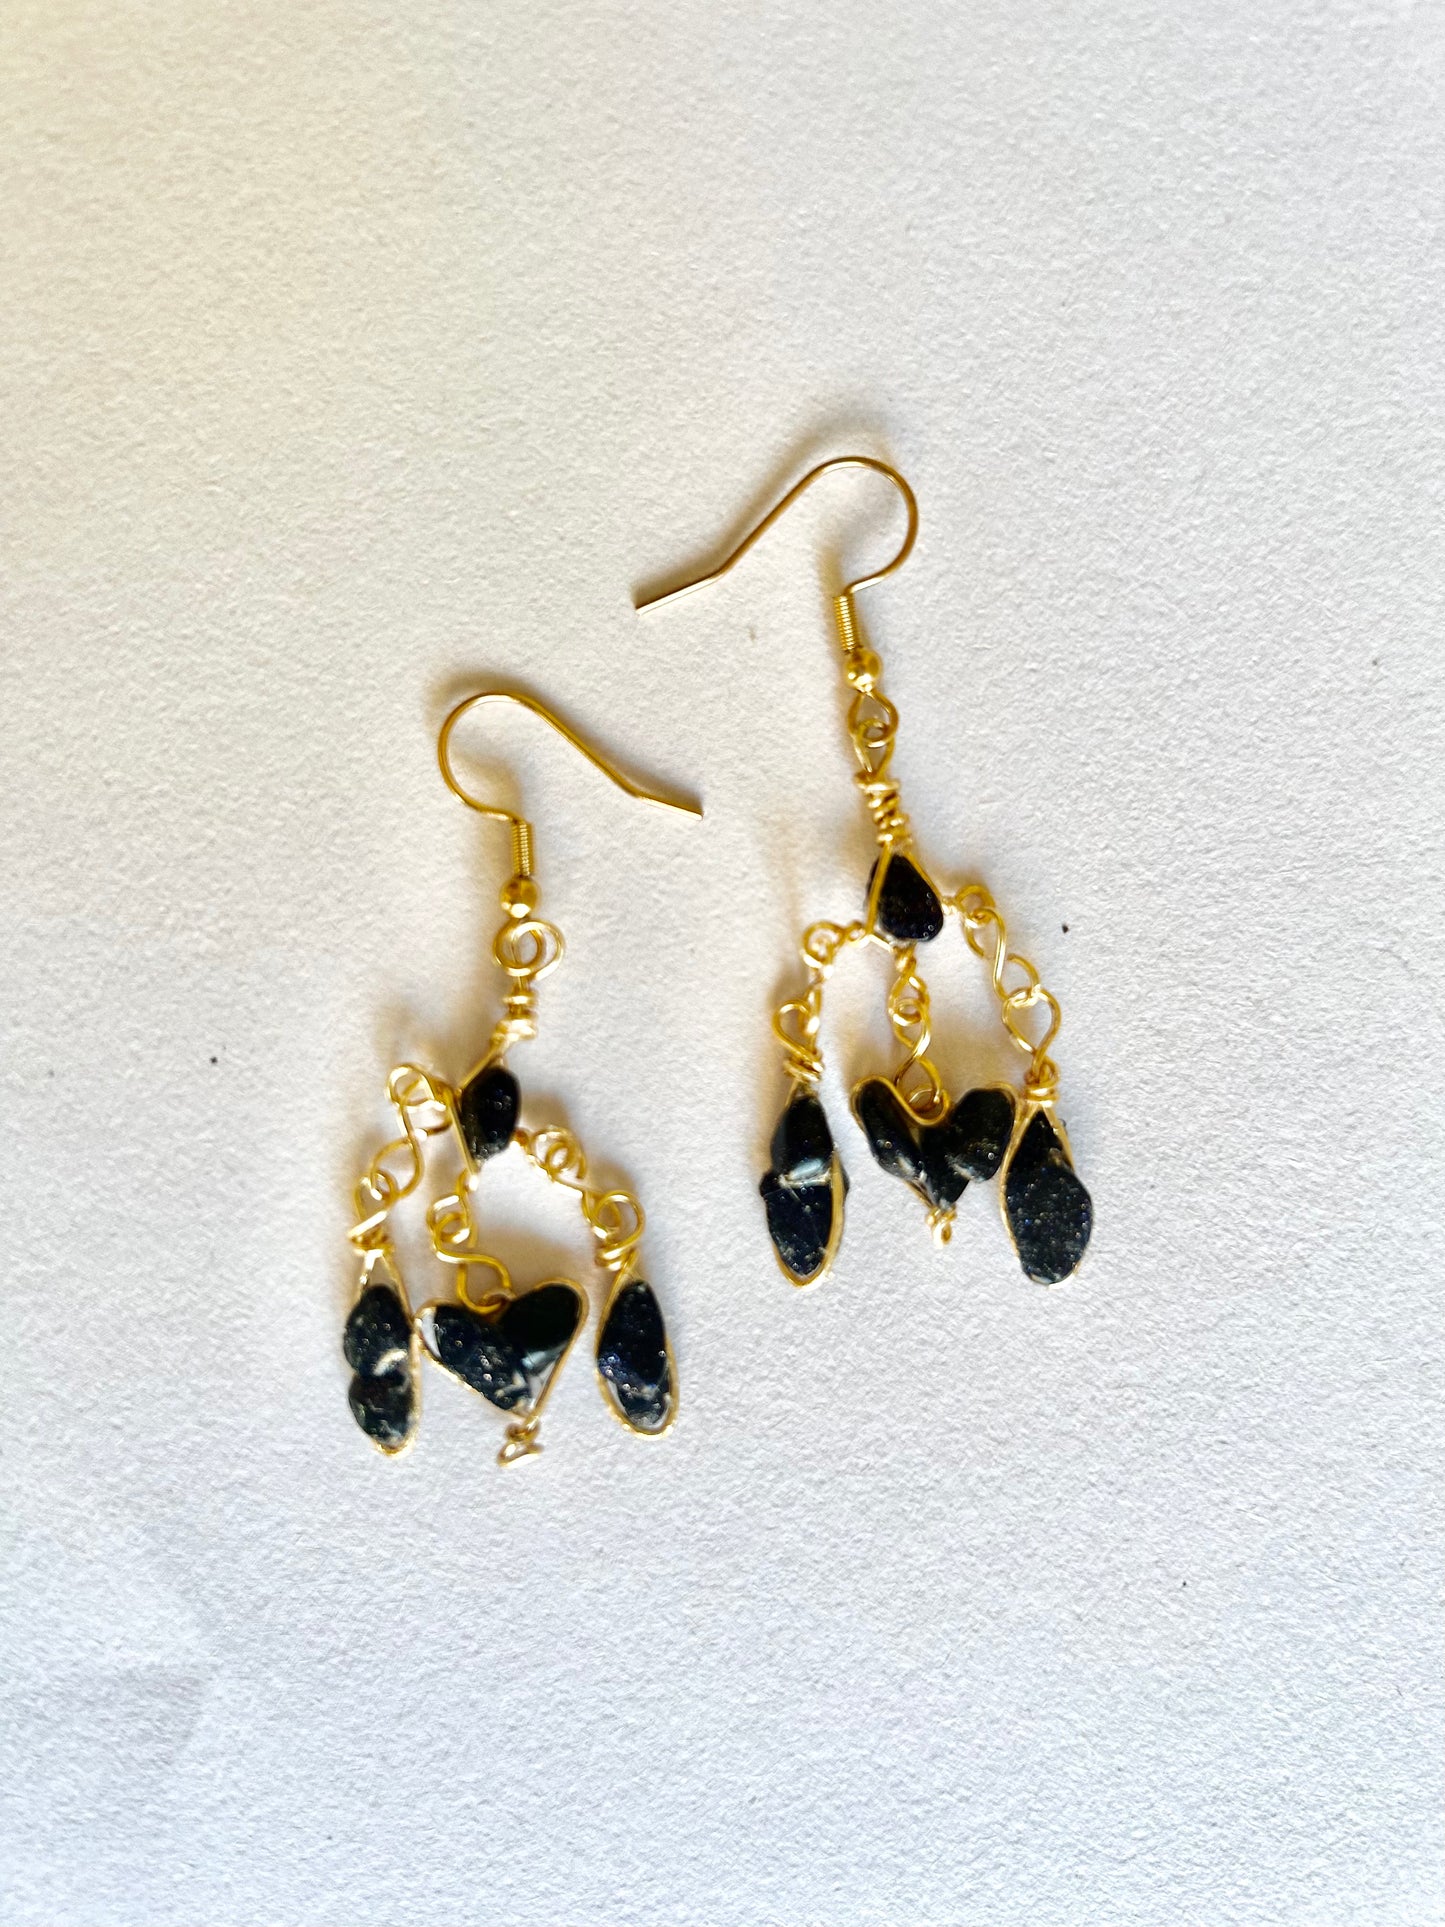 Stepping into me earrings